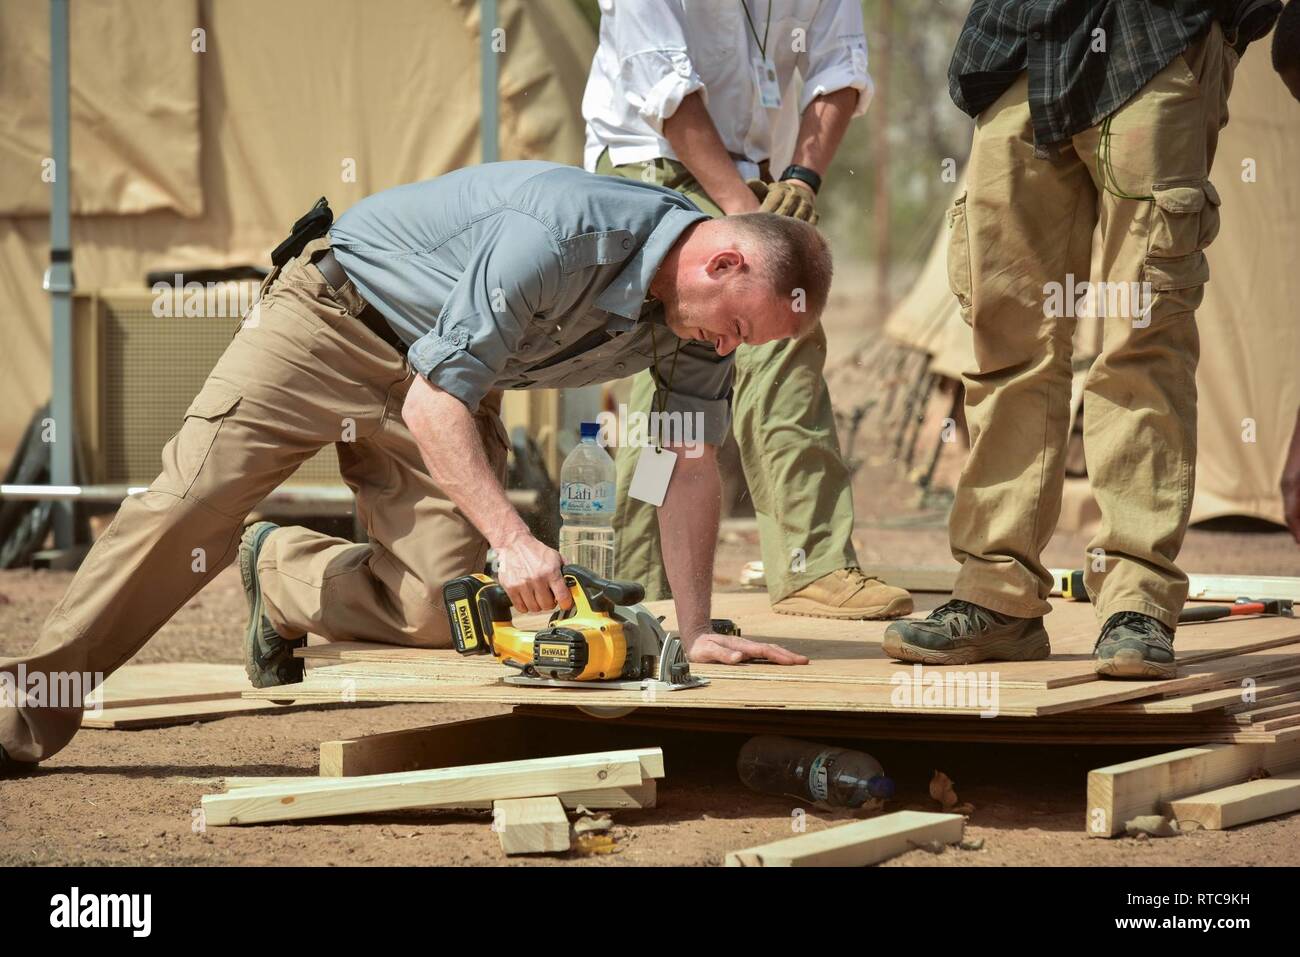 U.S. Army engineers saw wood to update tent layouts at the Flintlock camp in Loumbila, Burkina Faso during the pre-stages of Exercise Flintlock 2019 Feb. 12, 2019. Engineers like these were part of an advance team that arrived a week prior to everyone else to ensure each Flintlock outstation was built properly and met the requirements for an exercise of Flintlock's scale. Stock Photo